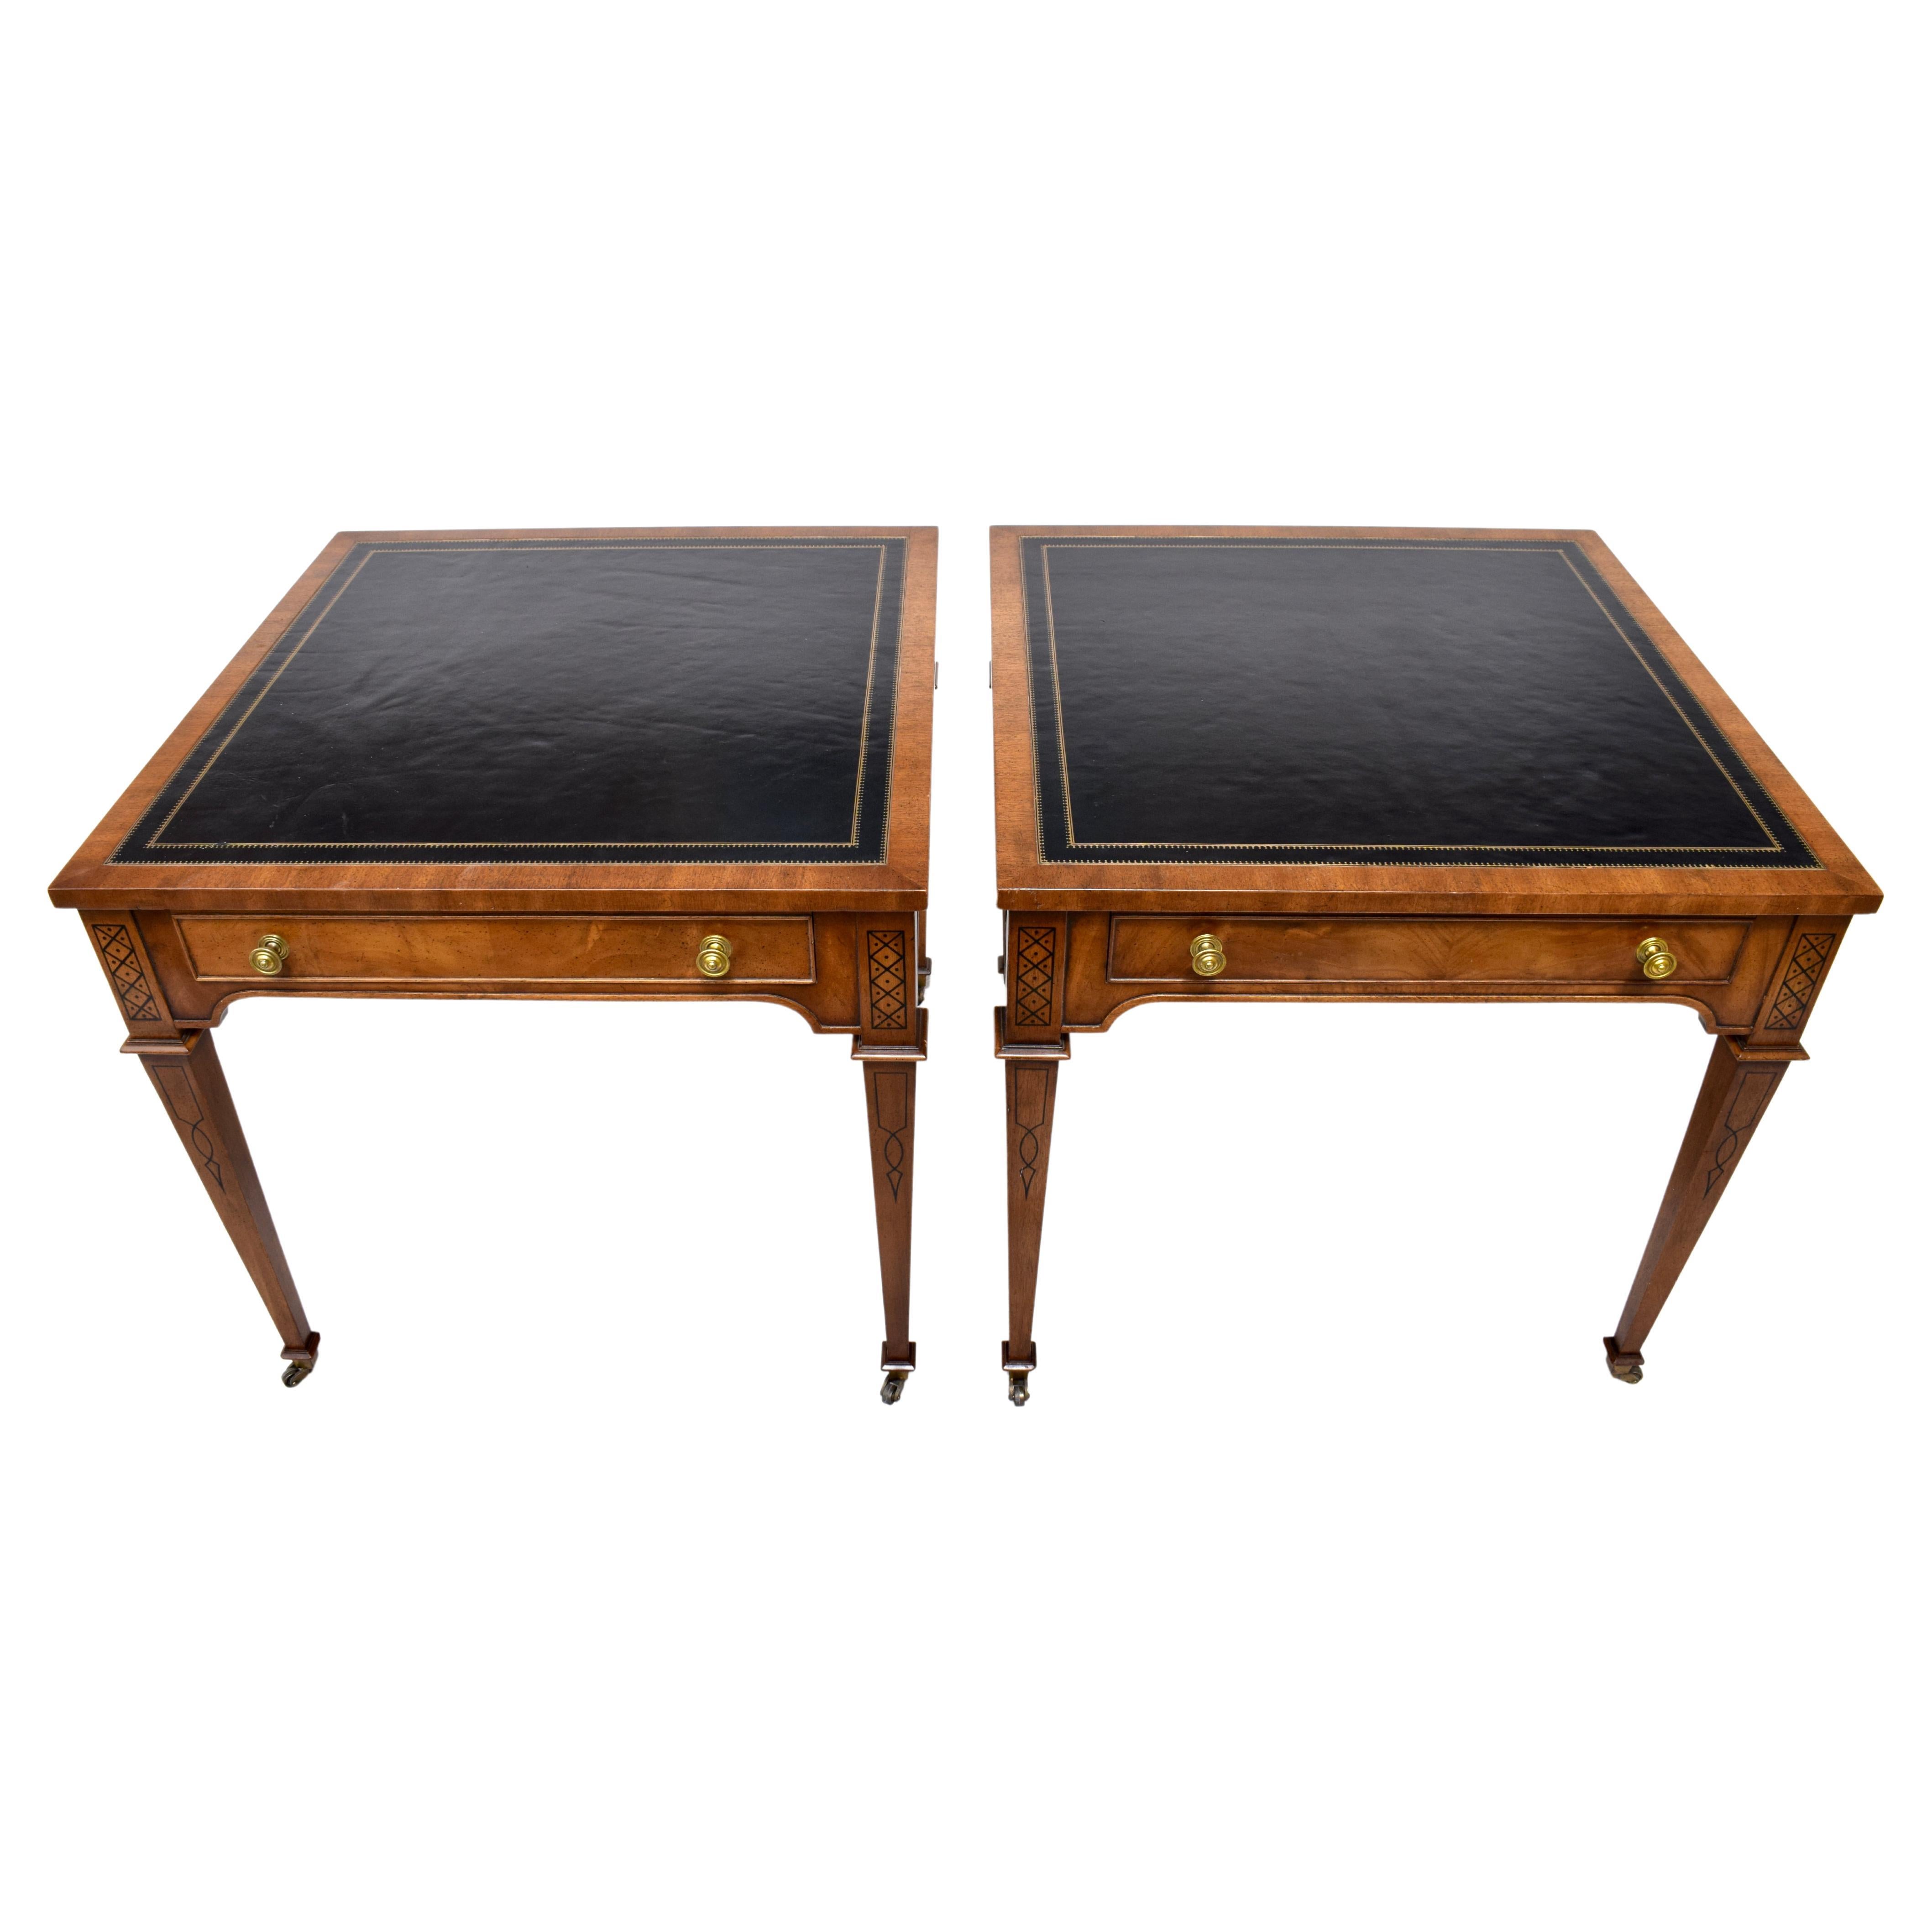 Heritage Regency Leather Top End Tables on Casters